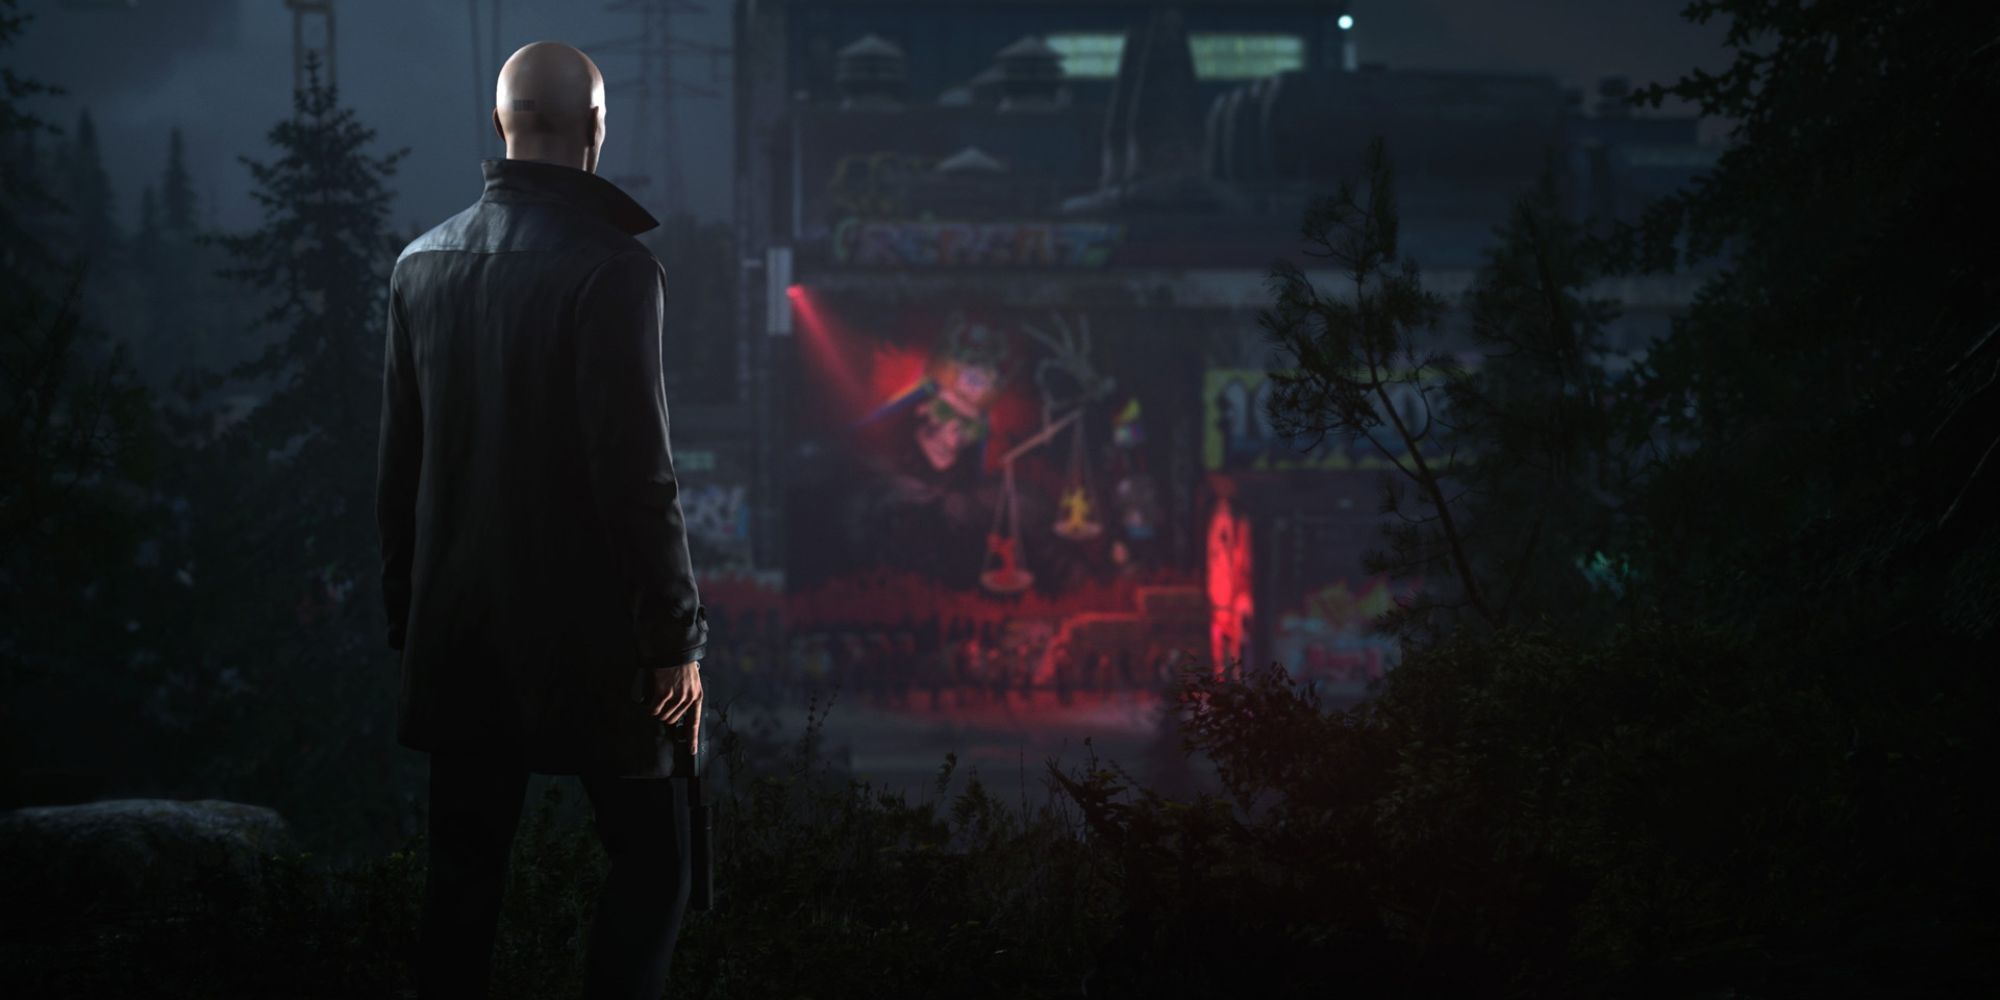 Agent 47 stands outside a bar at night